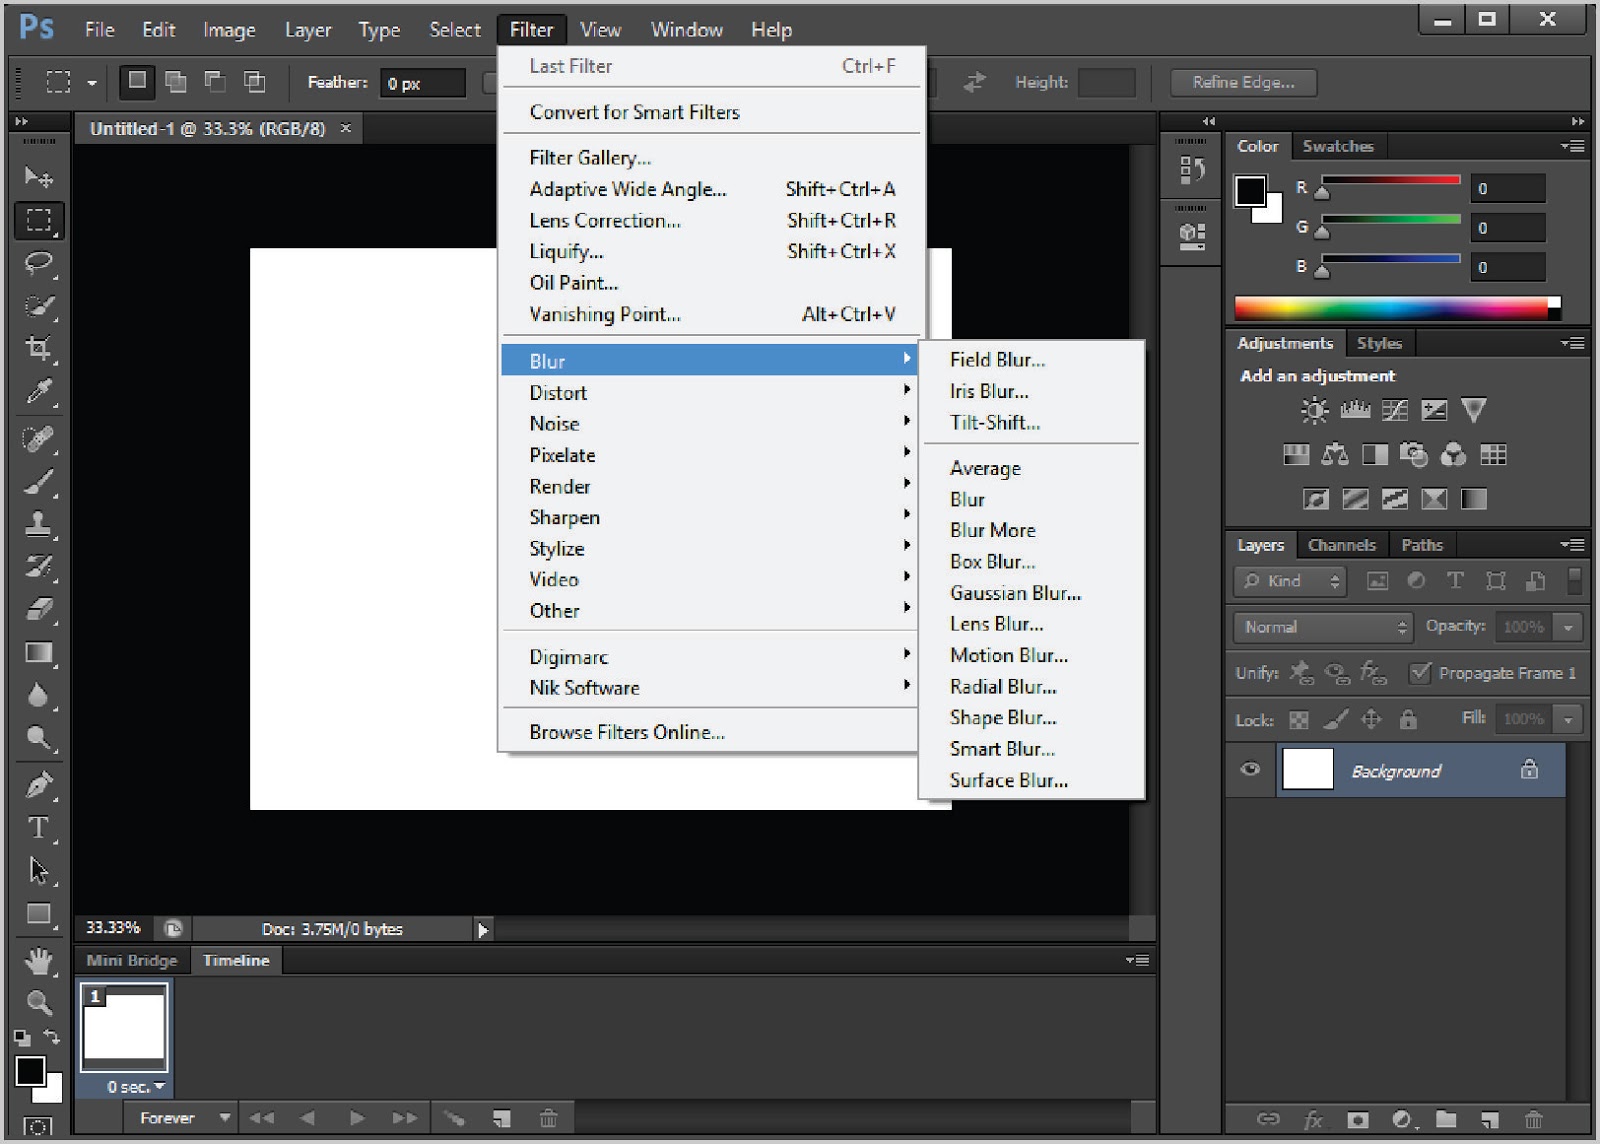 adobe photoshop 2016 free download full version with crack